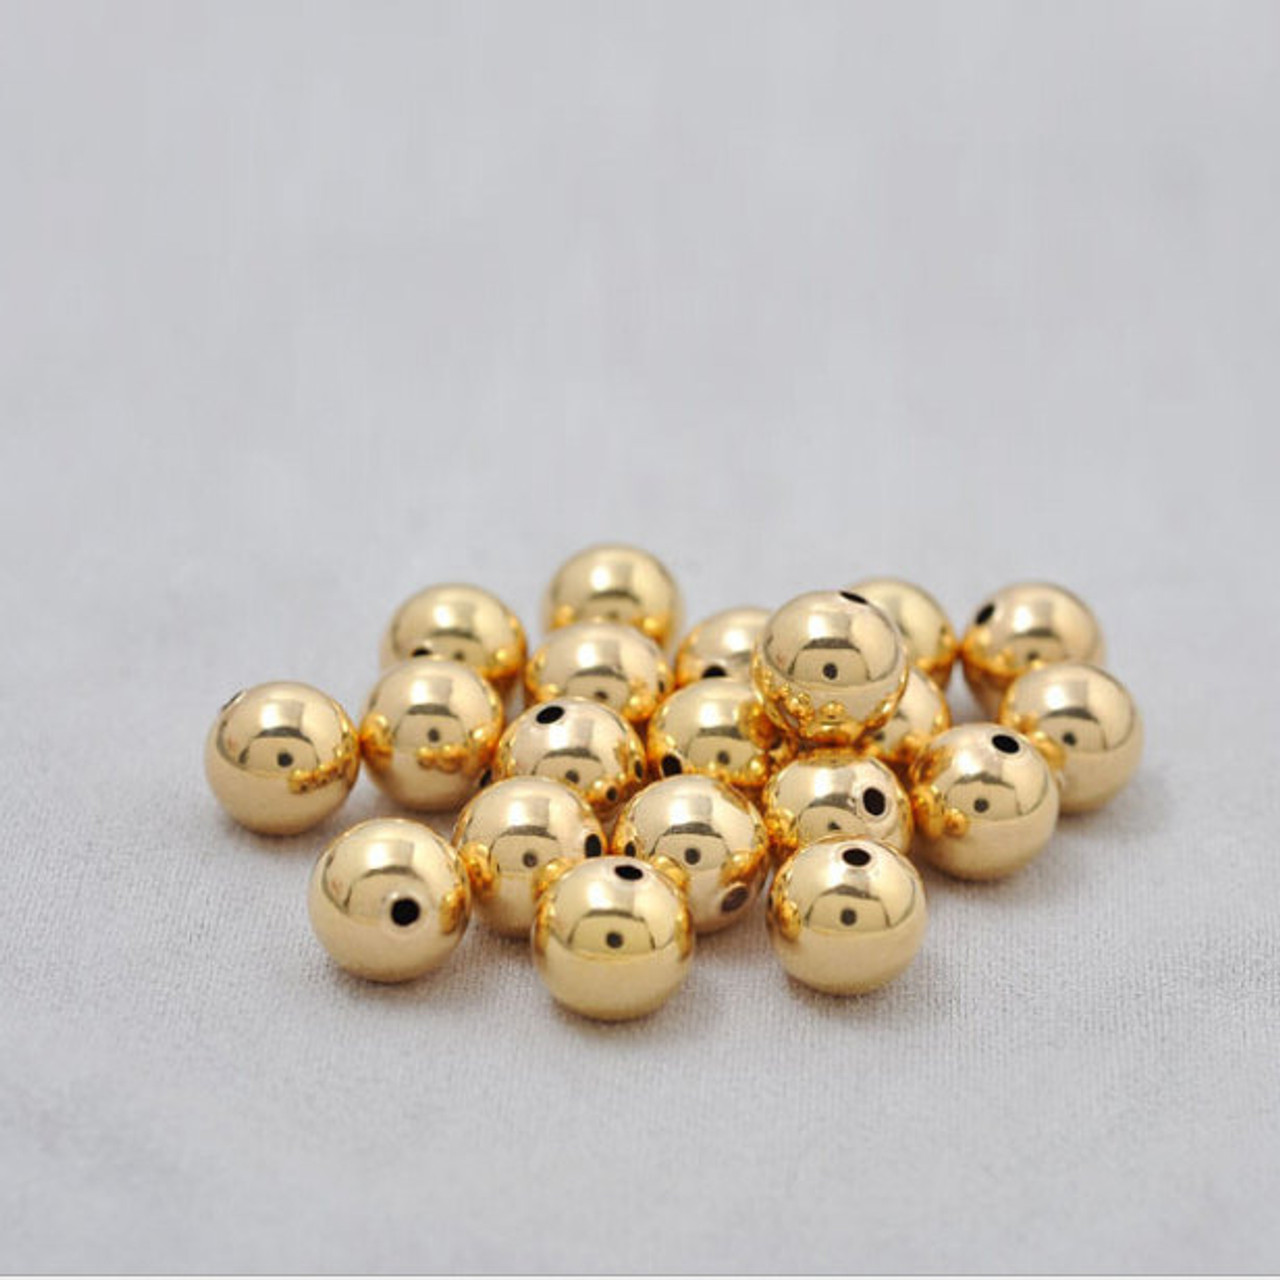 Deoot 1240 PCS 8 Styles Gold Spacer Beads with Kuwait